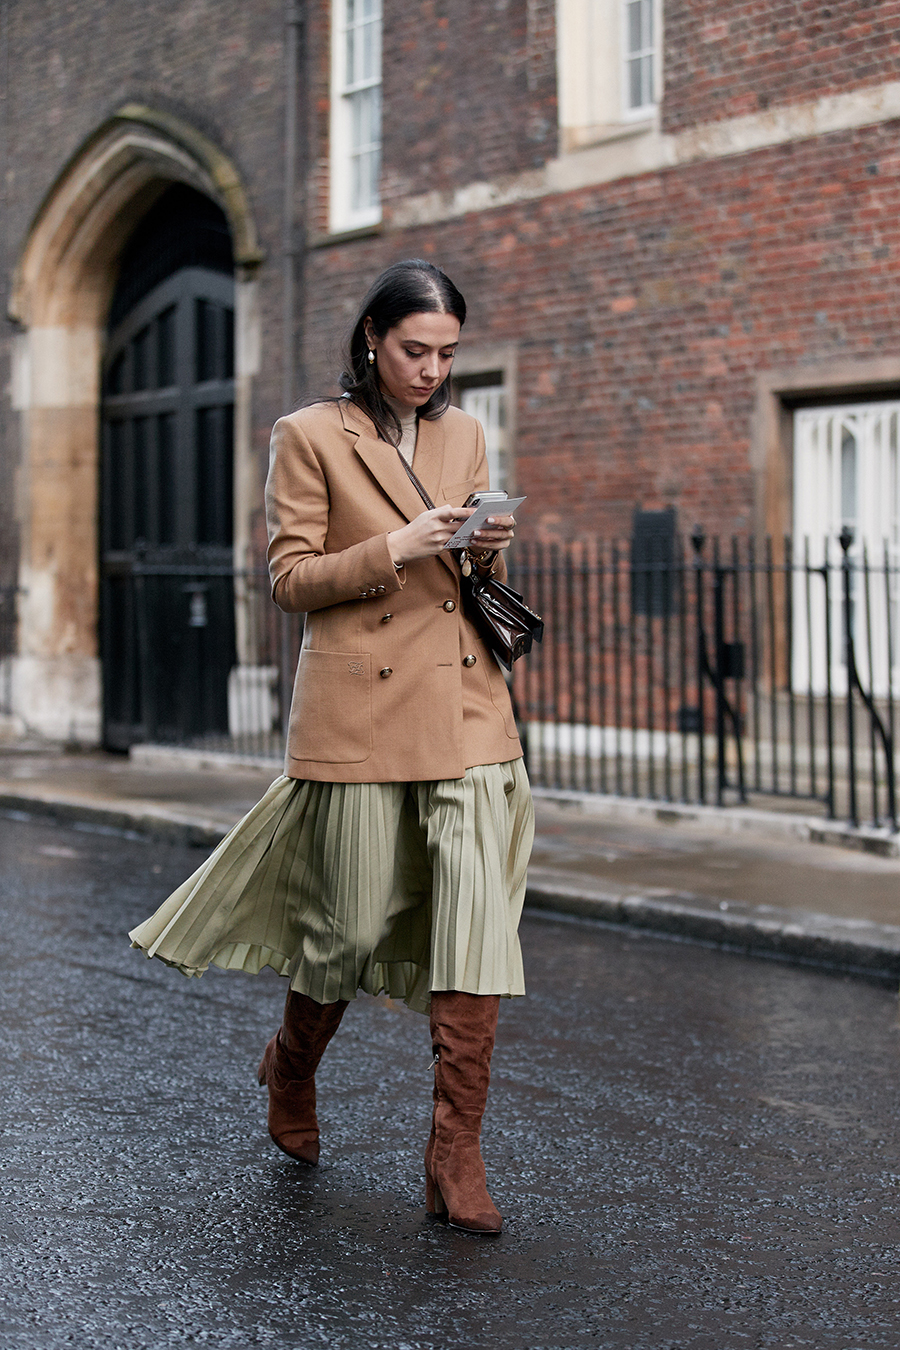 How to Wear Long Skirts if You're Short - Venti Fashion